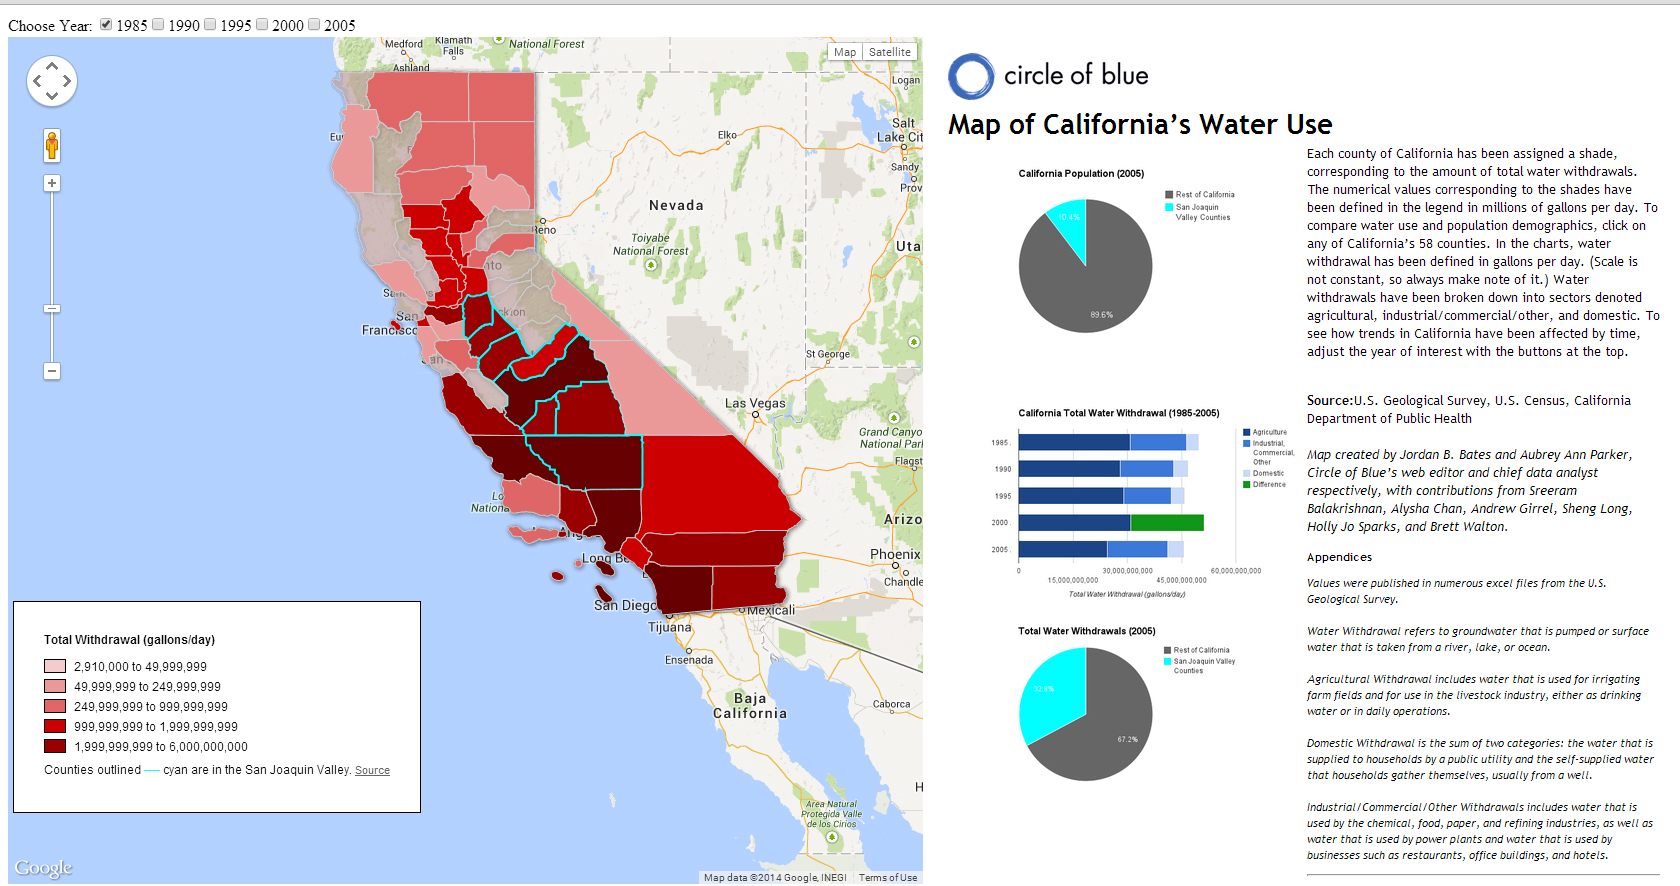 california water use arsenic central valley choke point index circle of blue